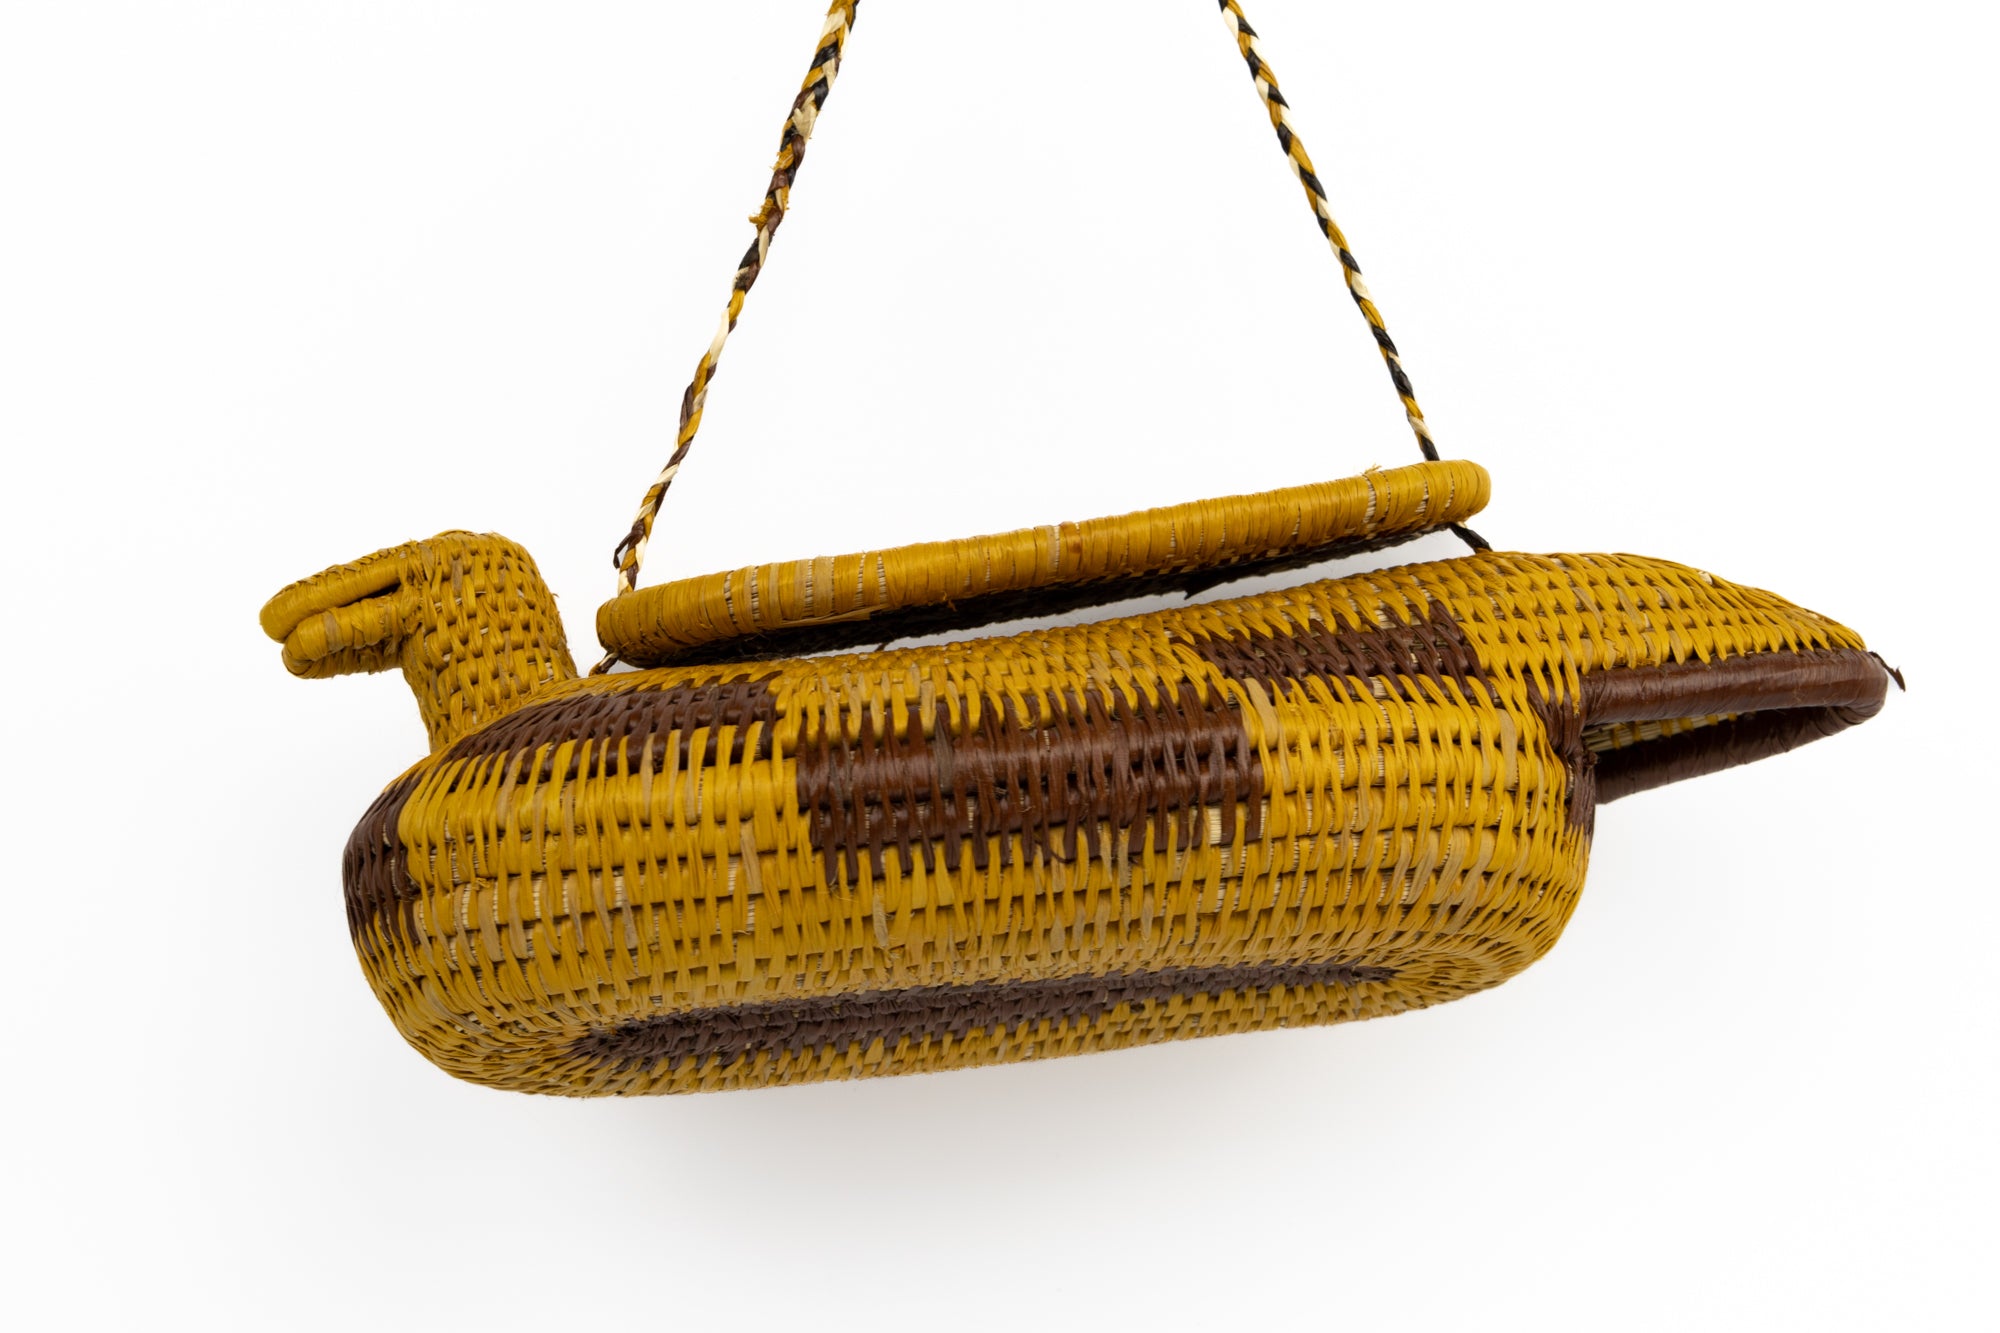 Hand Woven Vintage Hanging Duck Basket Made By Indigenous Artisans